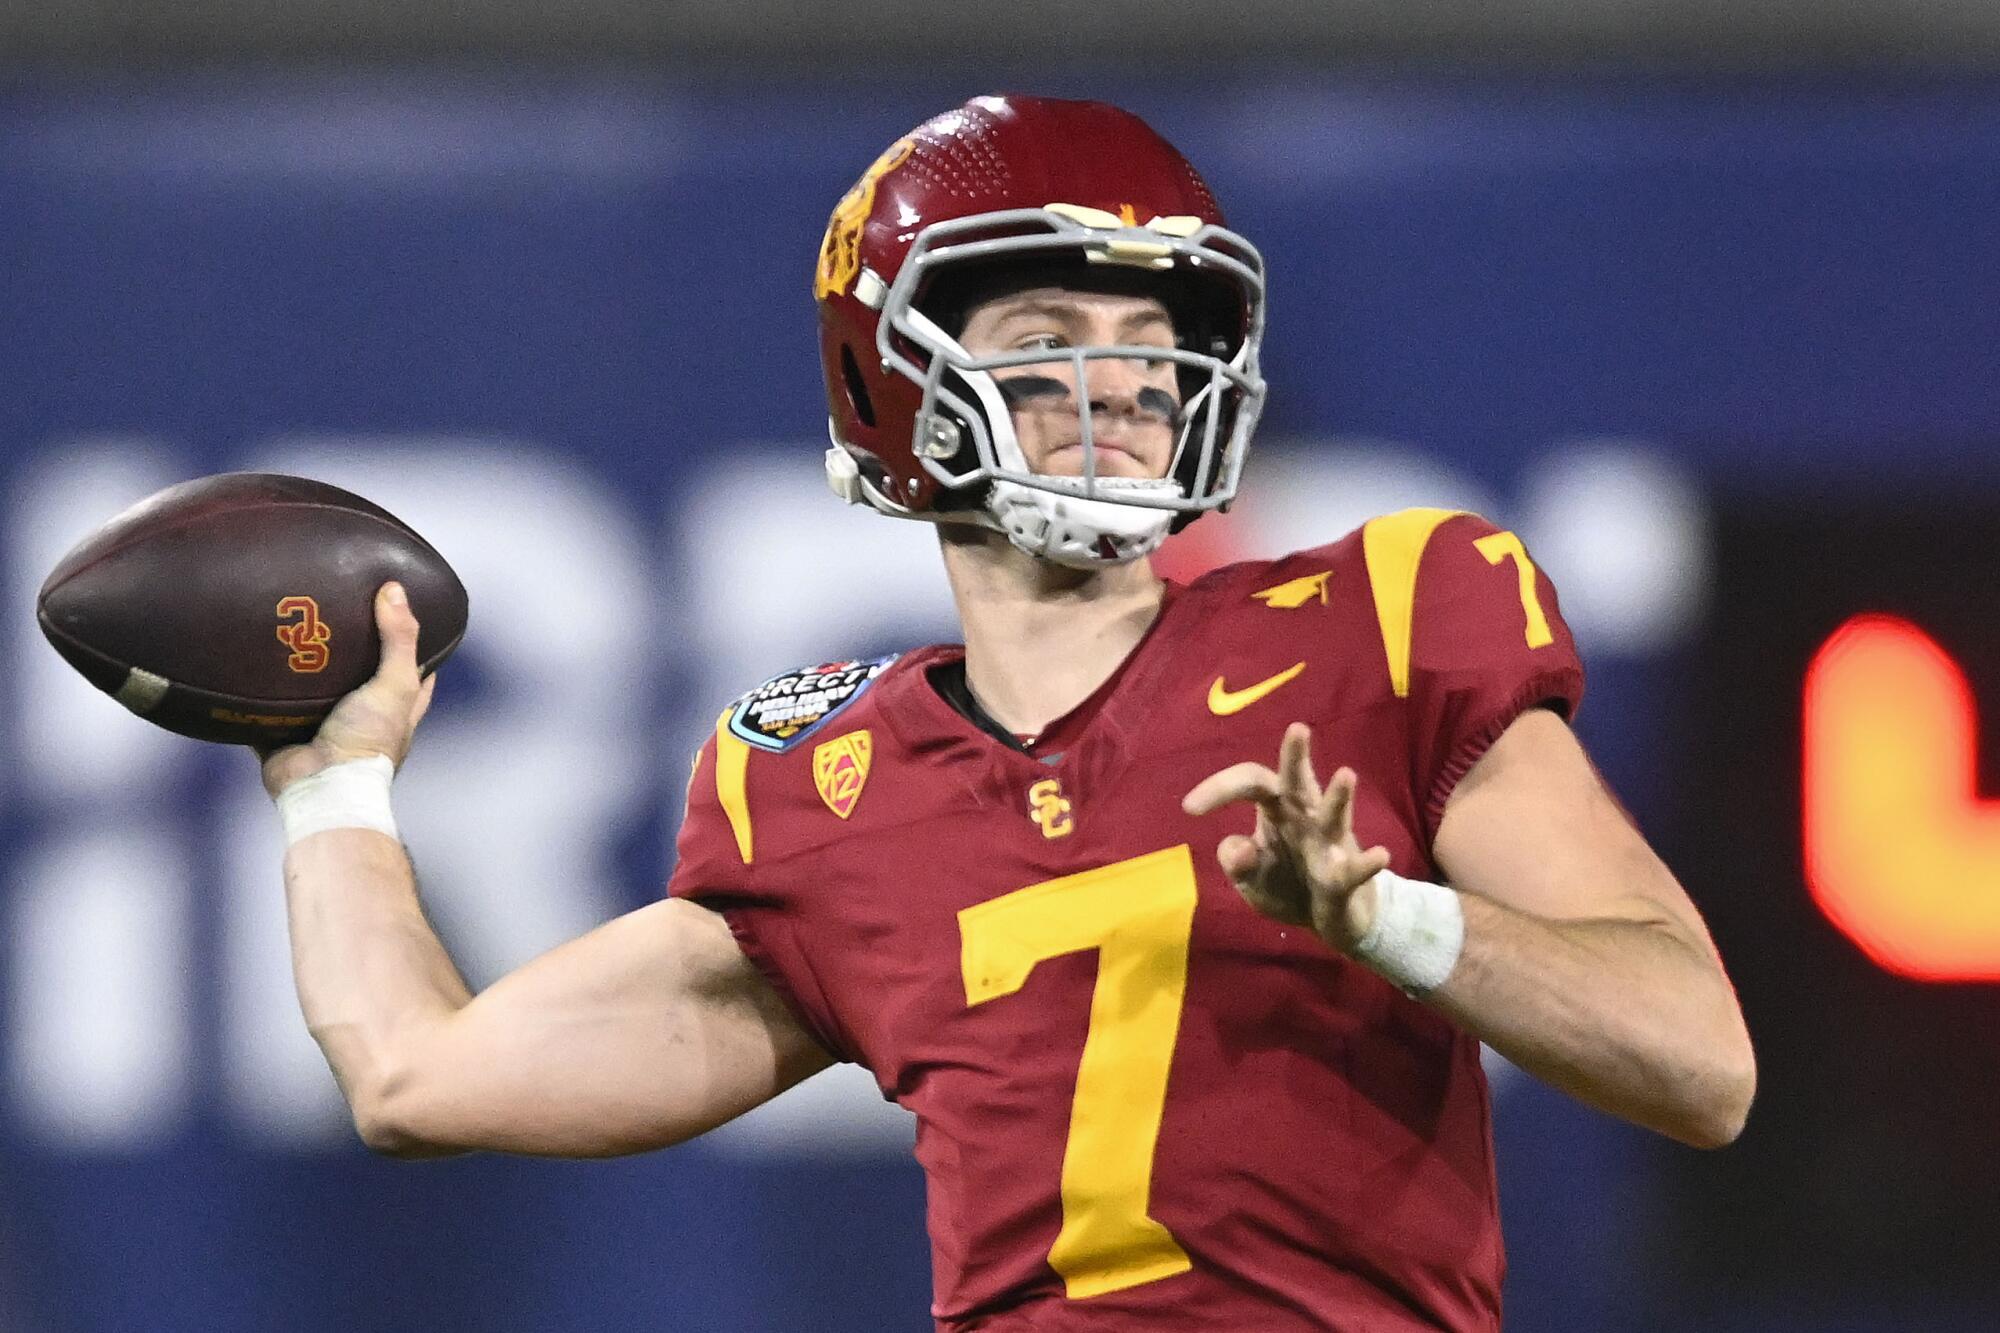 USC quarterback Miller Moss throws a pass during the Holiday Bowl against Louisville last season.